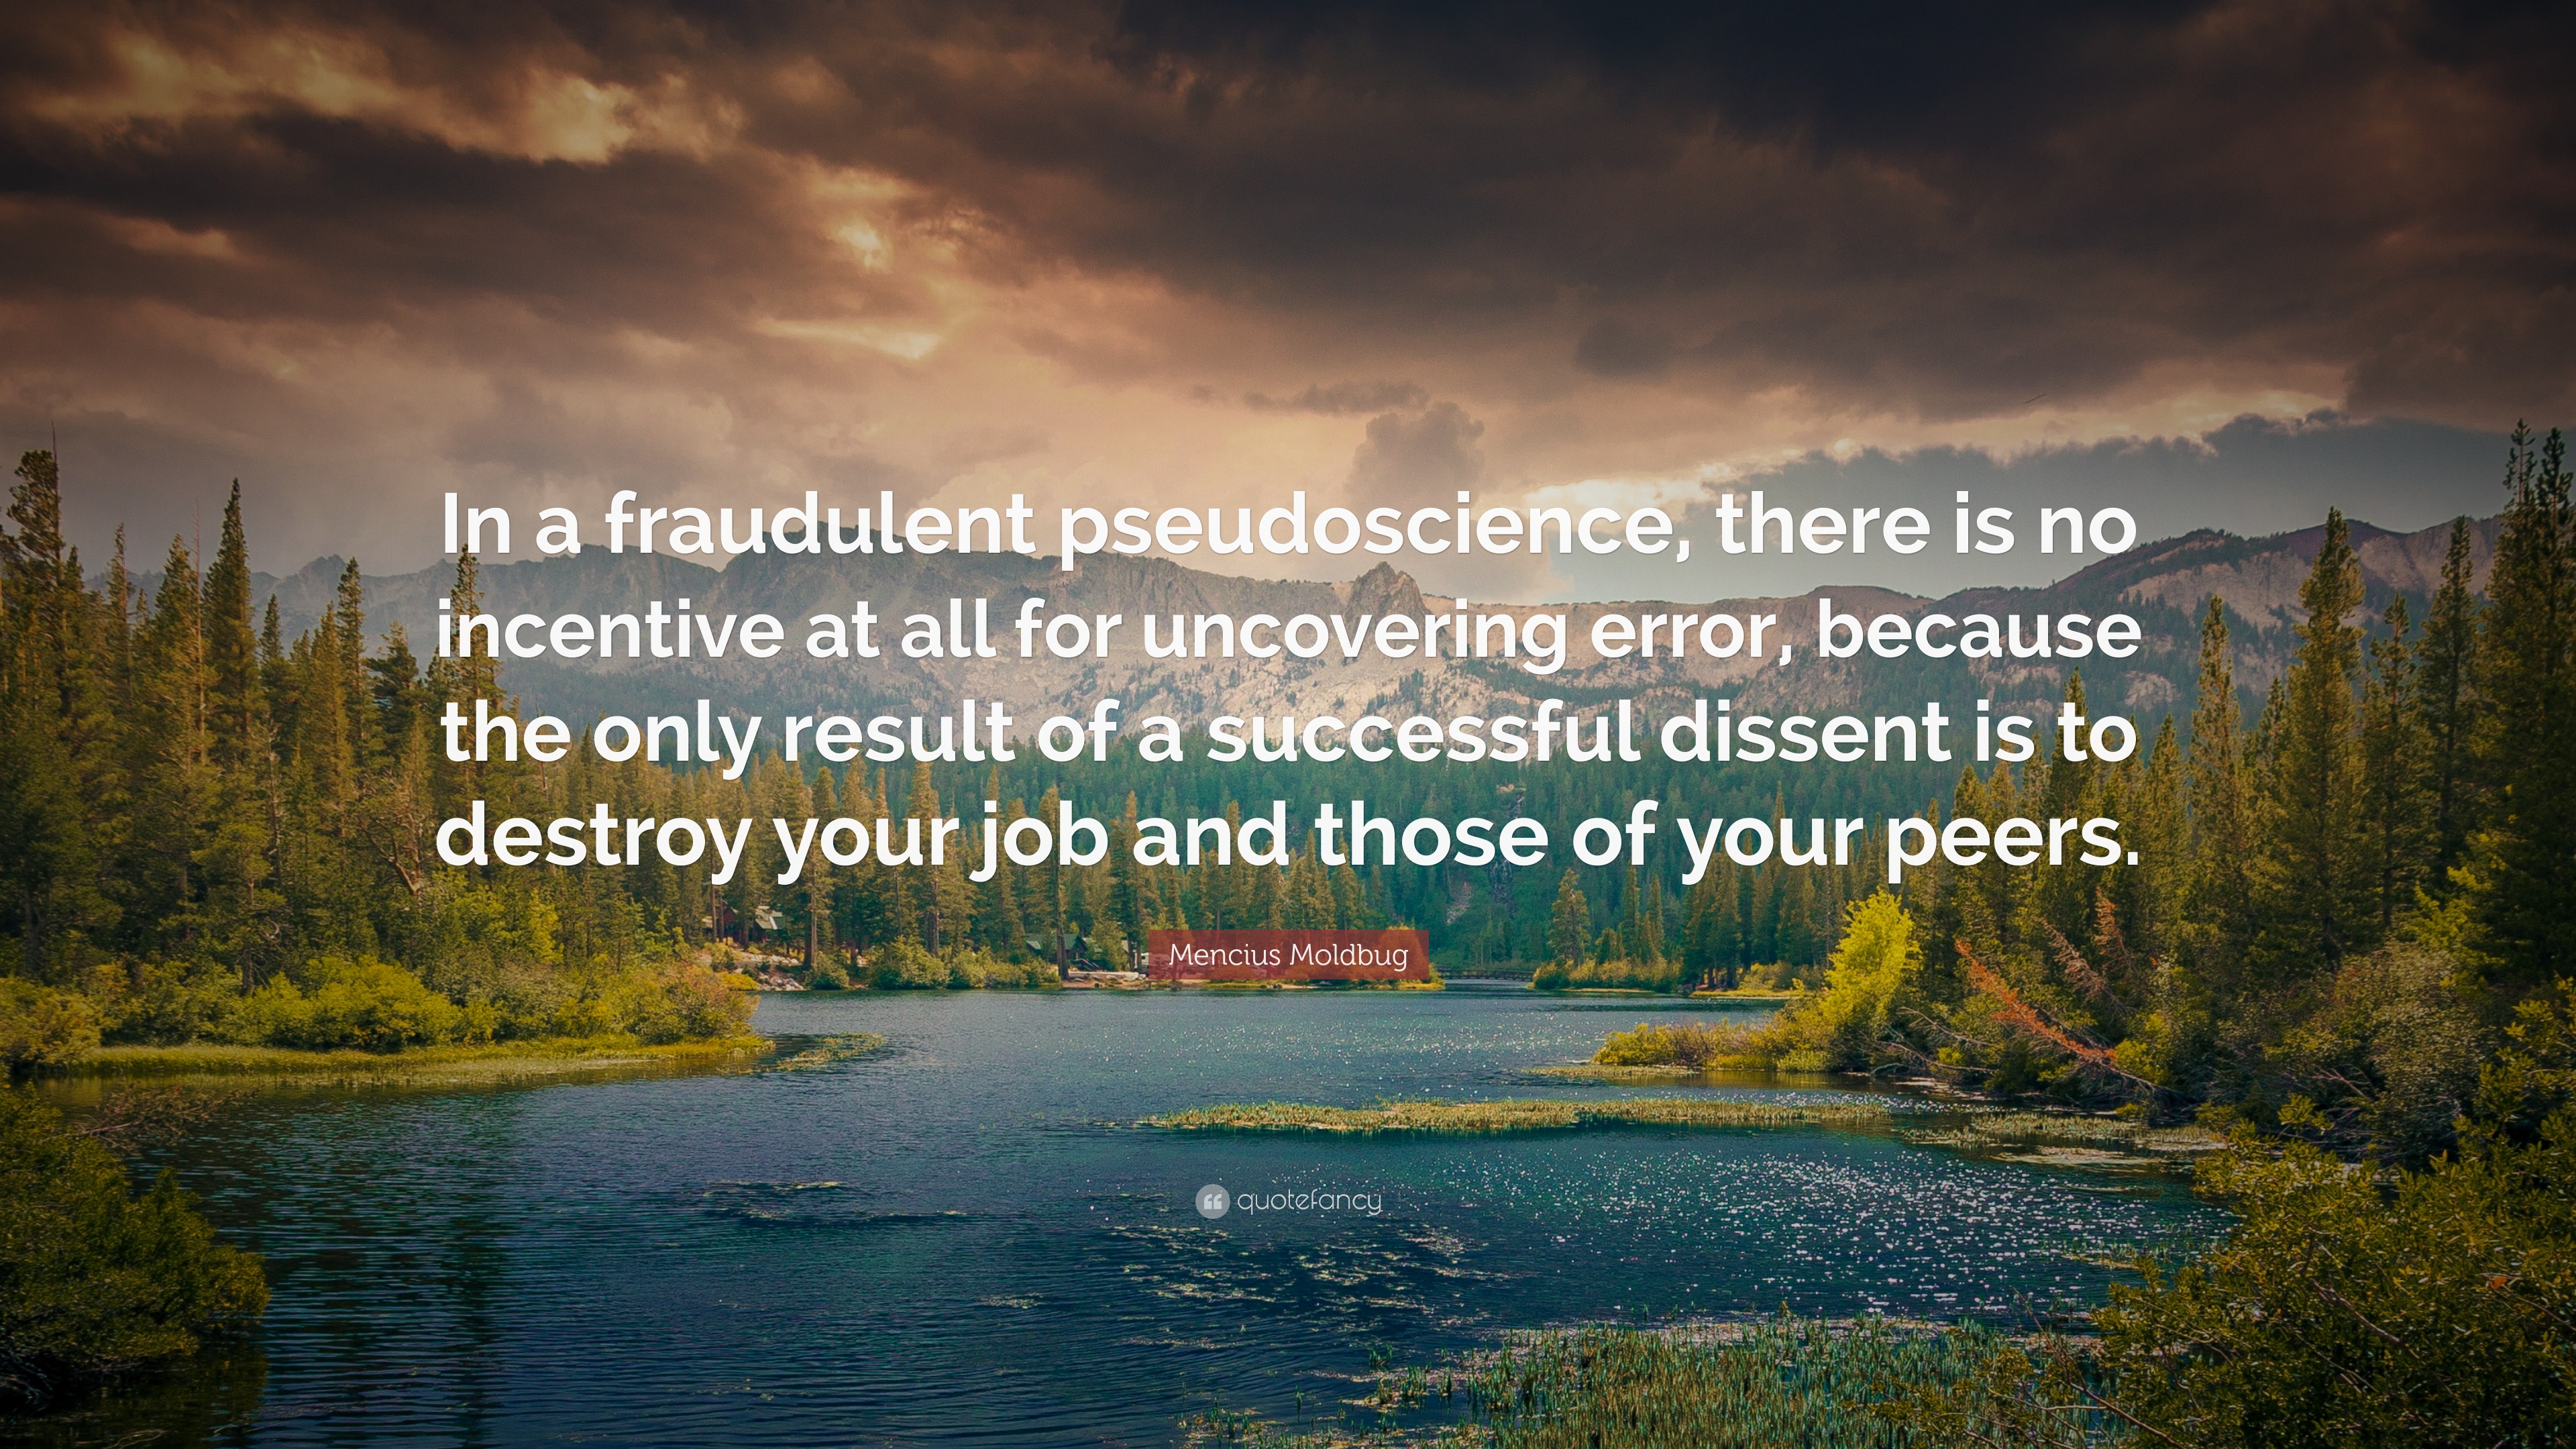 Mencius Moldbug Quote: “In a fraudulent pseudoscience, there is no ...